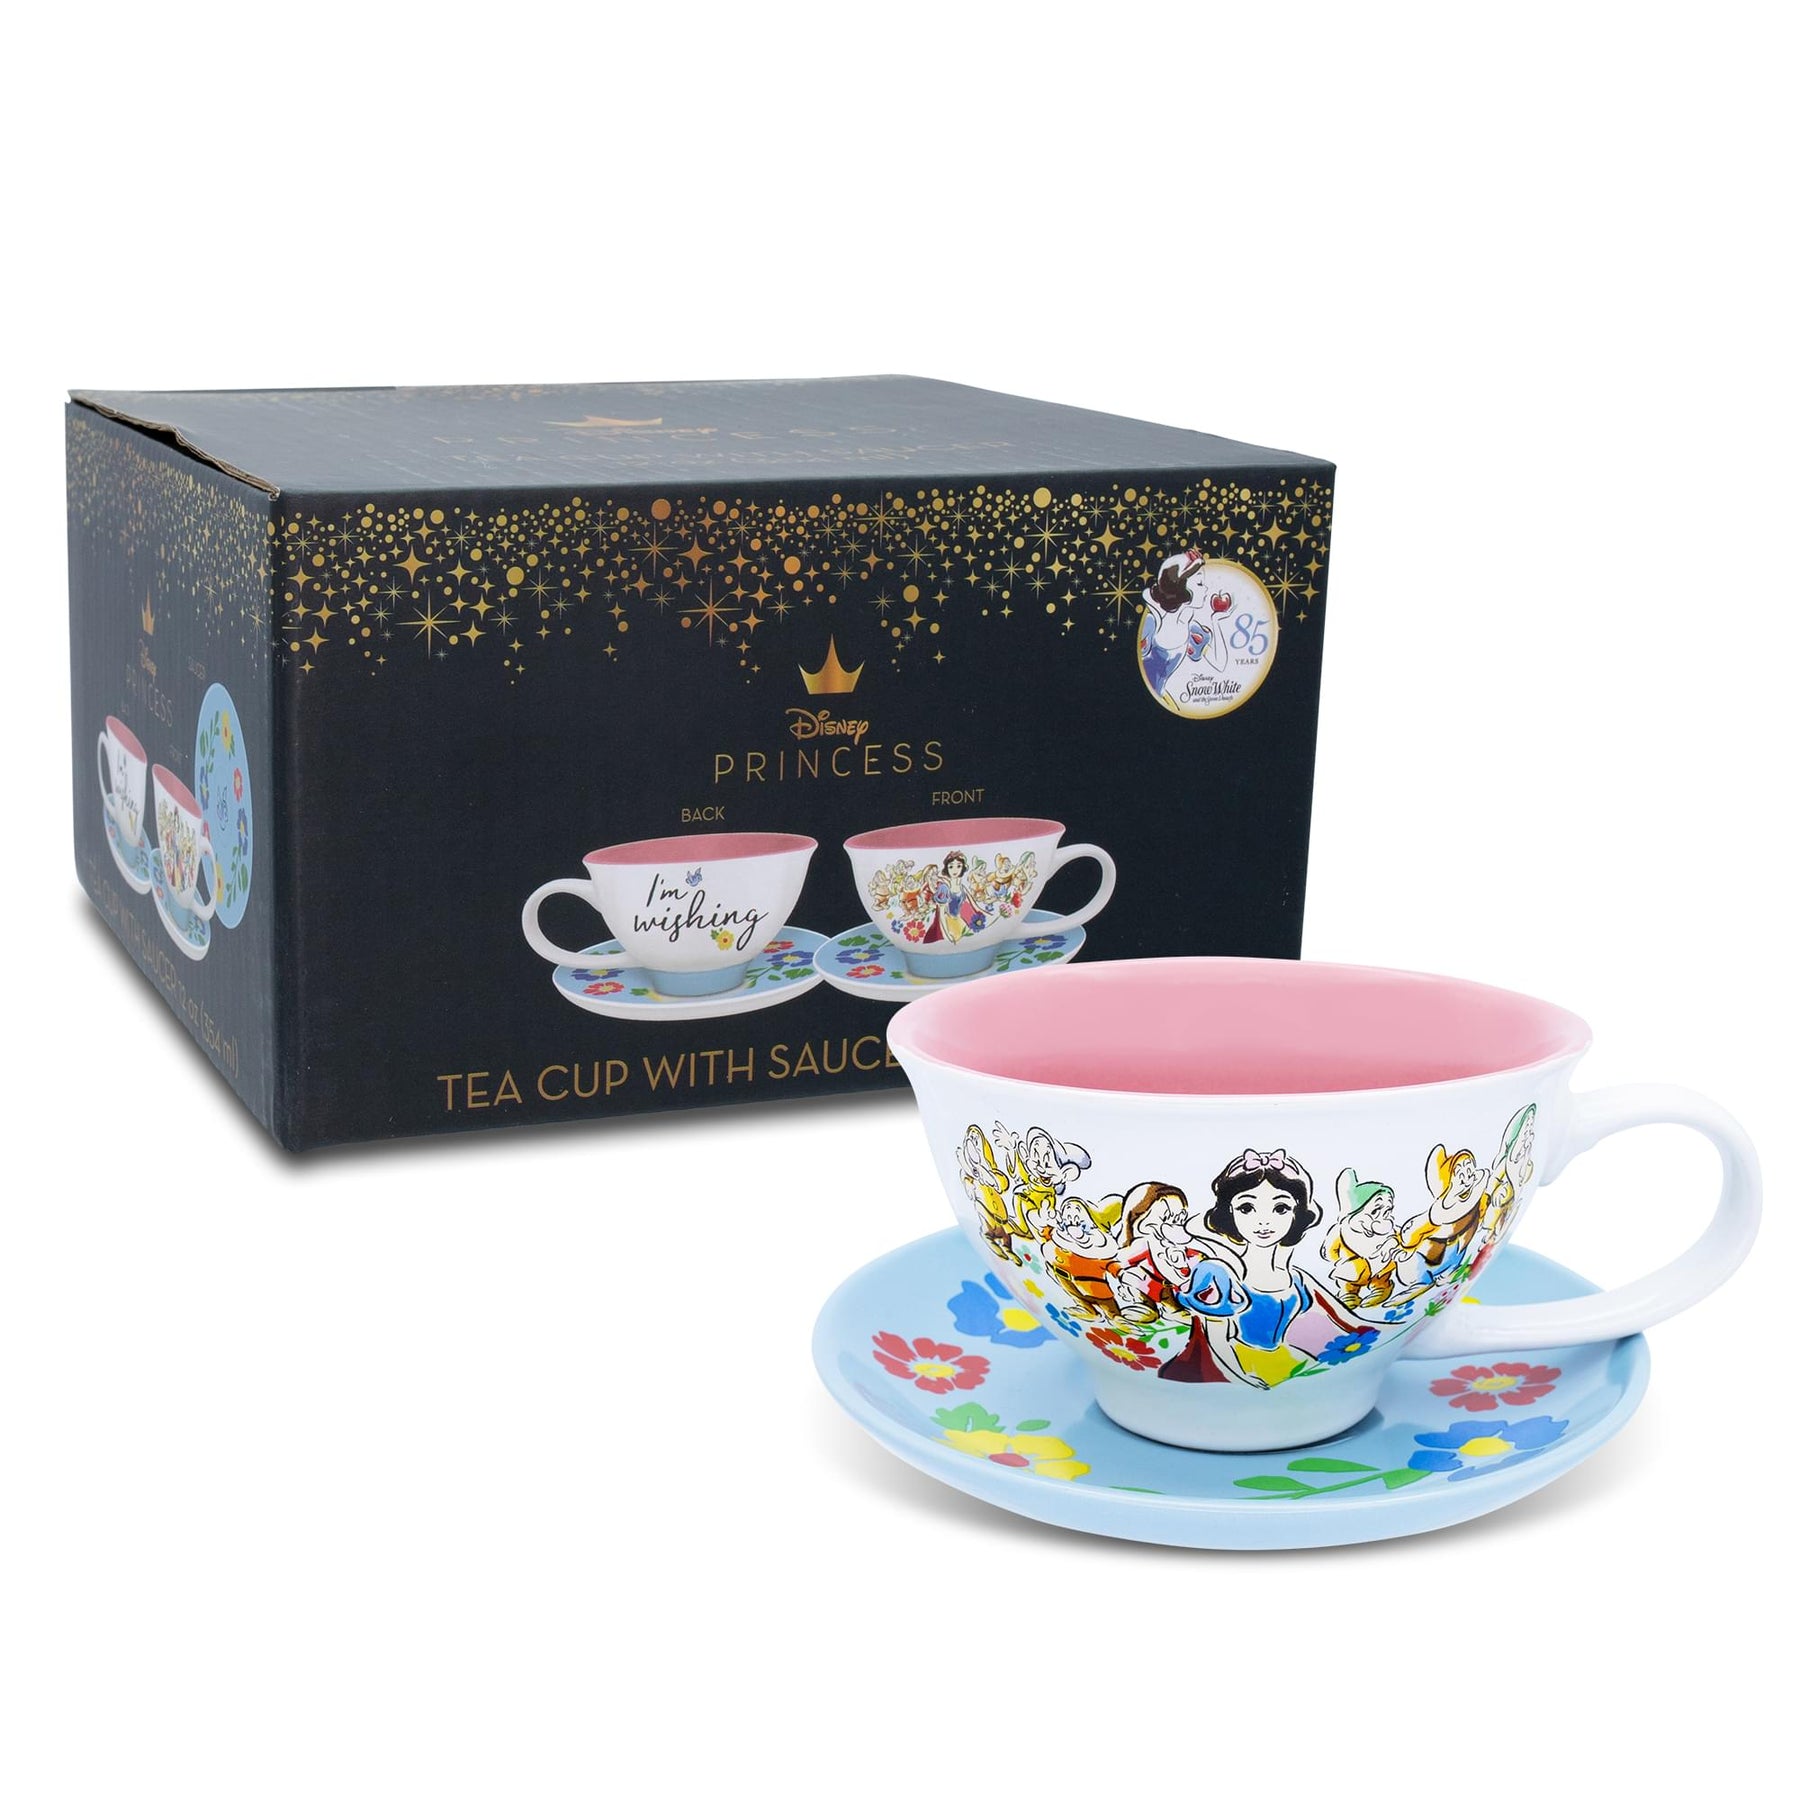 Disney Snow White and the Seven Dwarfs "I'm Wishing" Ceramic Teacup and Saucer